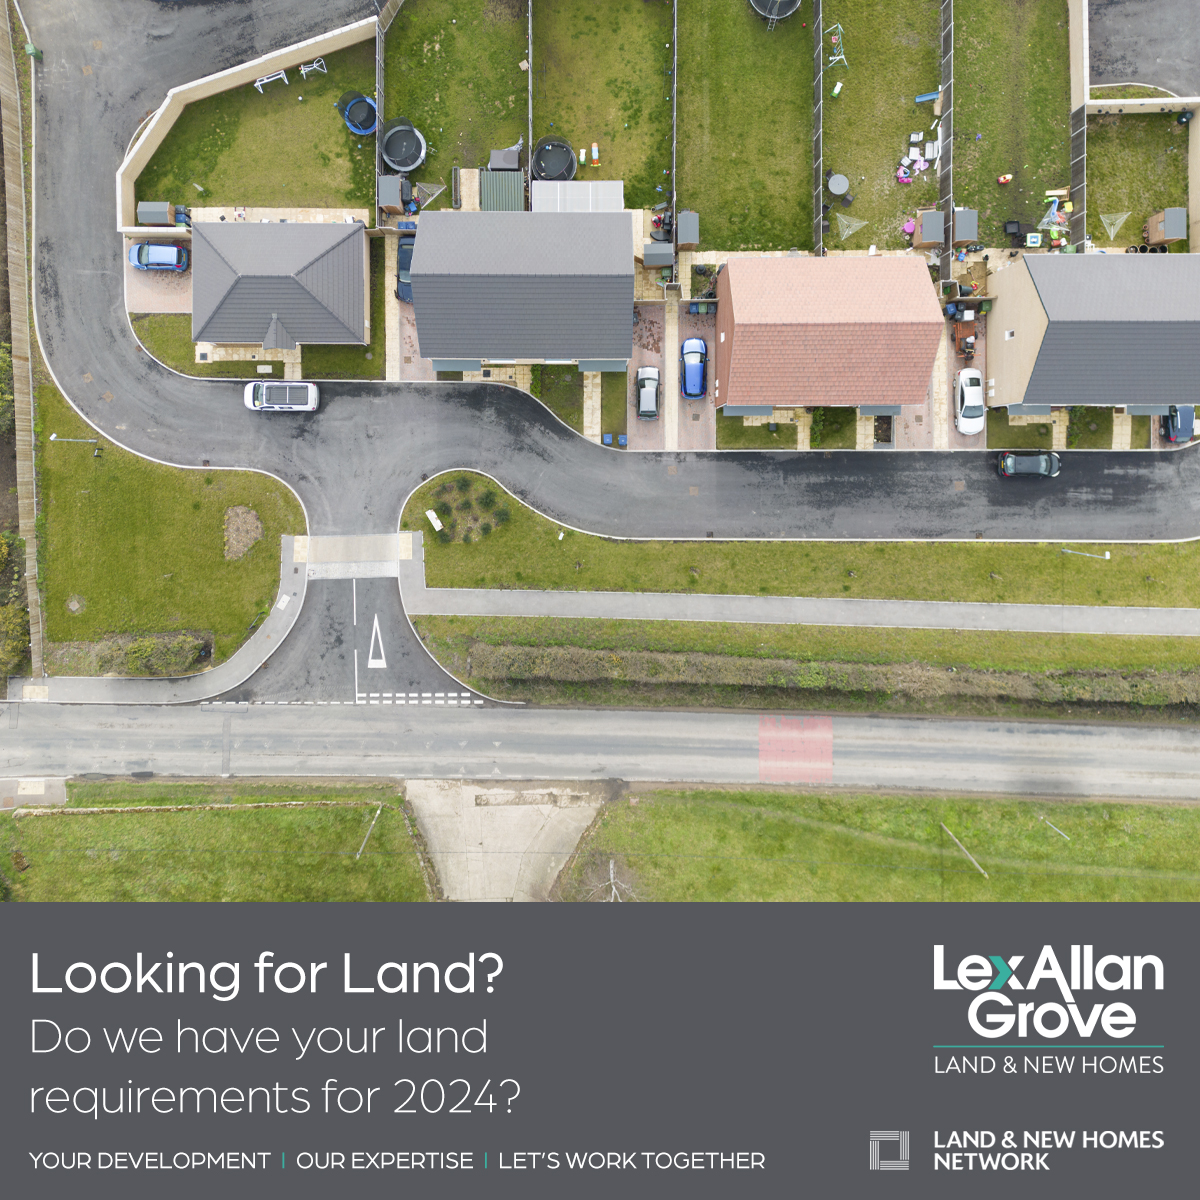 Looking for land? Do we have your requirements for 2024?
Please call 01562 270072 to talk to our expert team.
Your Development - Our Expertise - Let’s Work Together
#EstateAgents #ExceedingExpectations #land #propertydevelopment #newhomes #newhomesales
lexallan.co.uk/land-new-homes